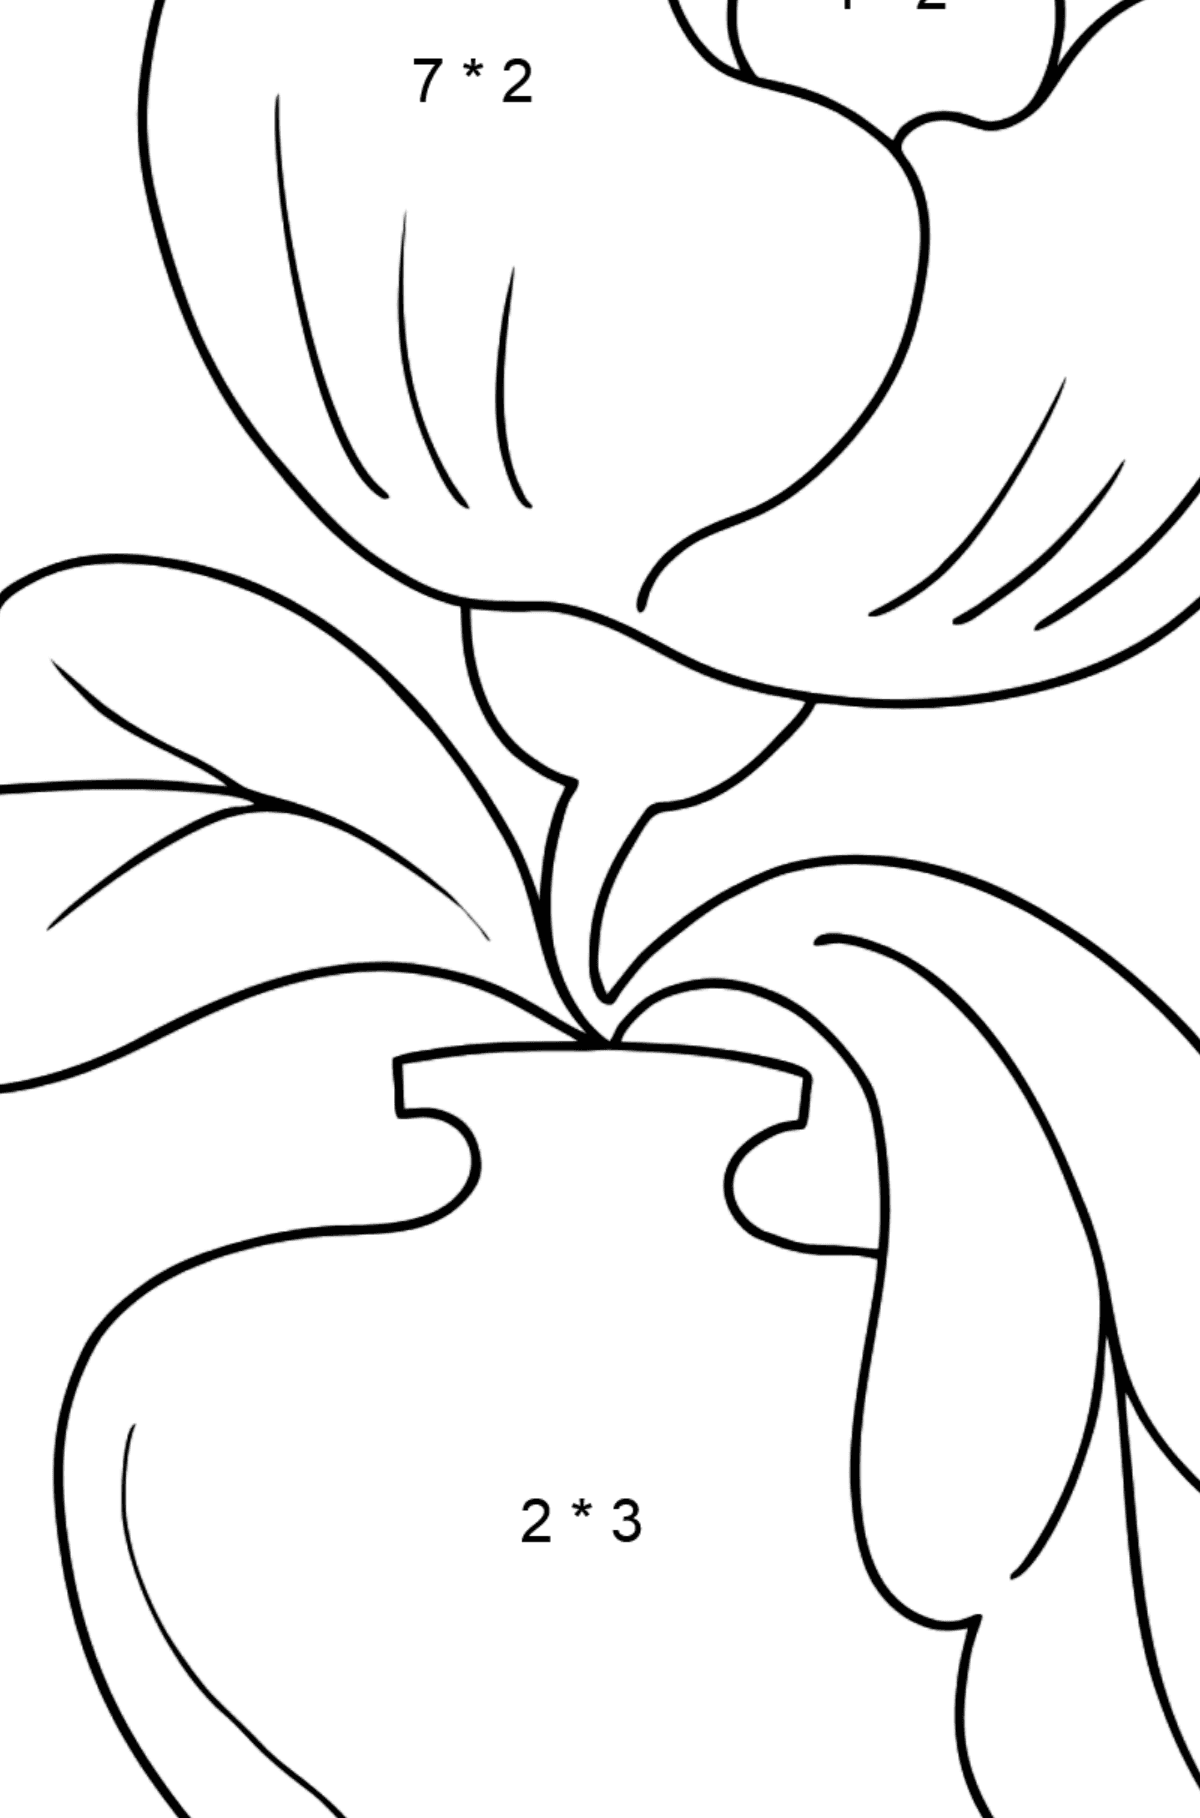 Coloring Page - flowers in a vase - Math Coloring - Multiplication for Kids